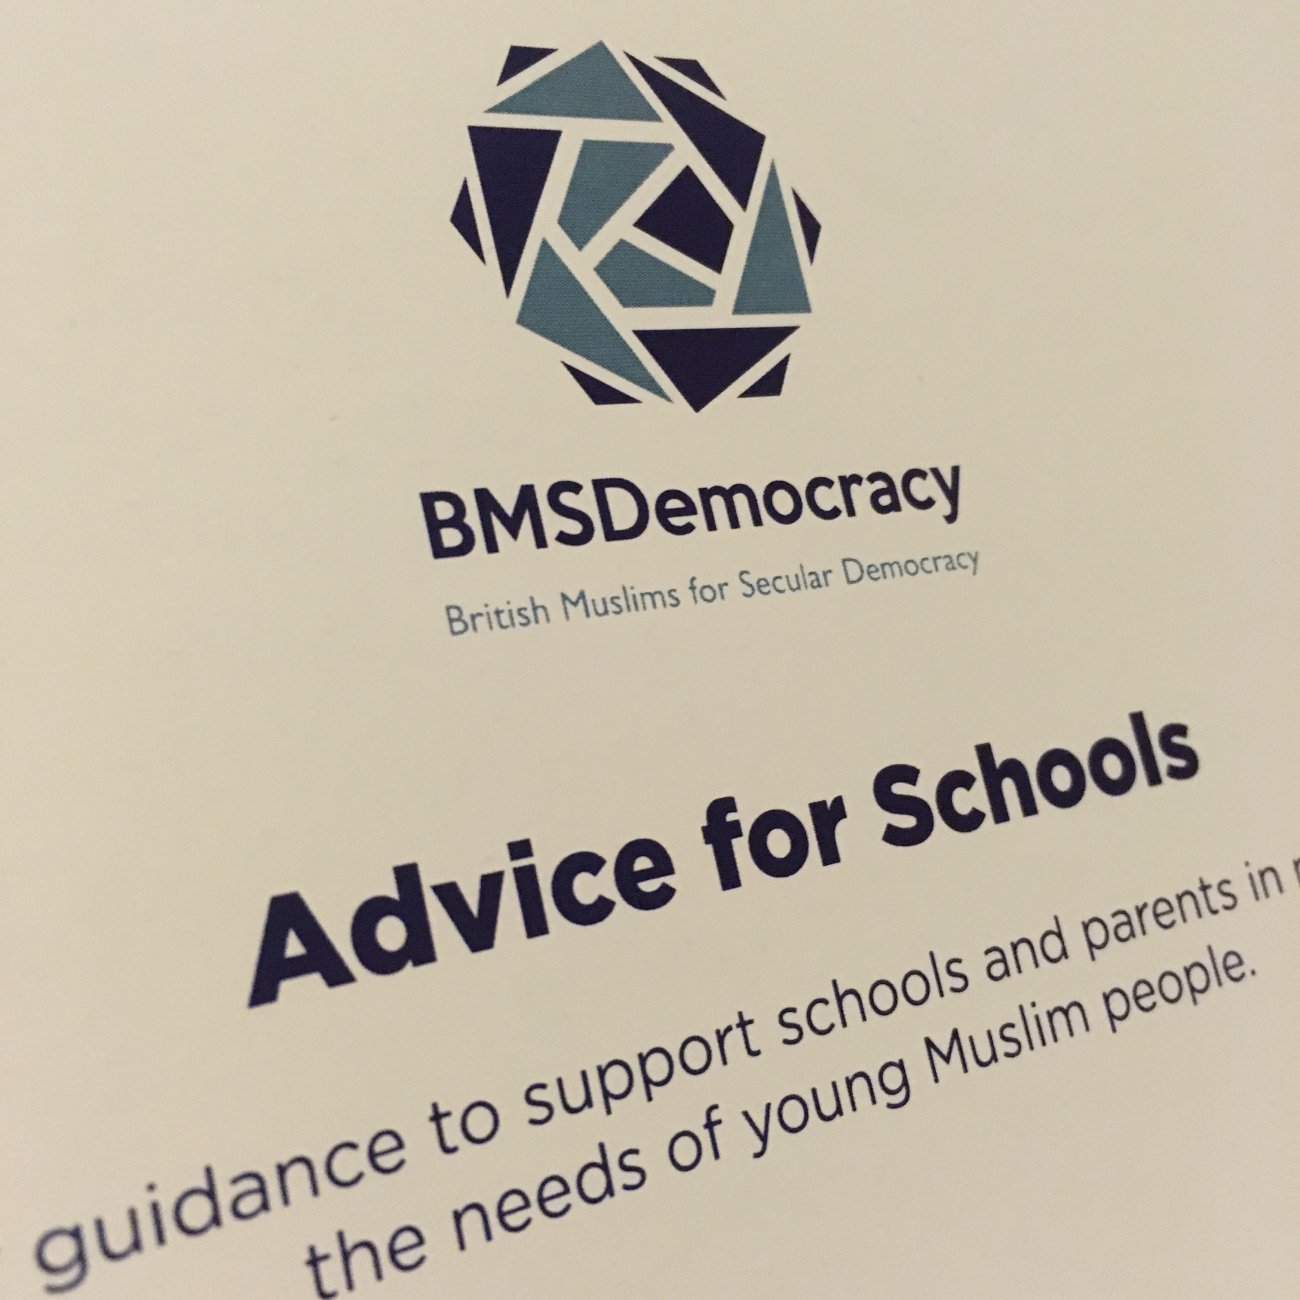 New guidance supports teaching RSE and evolution to young Muslims